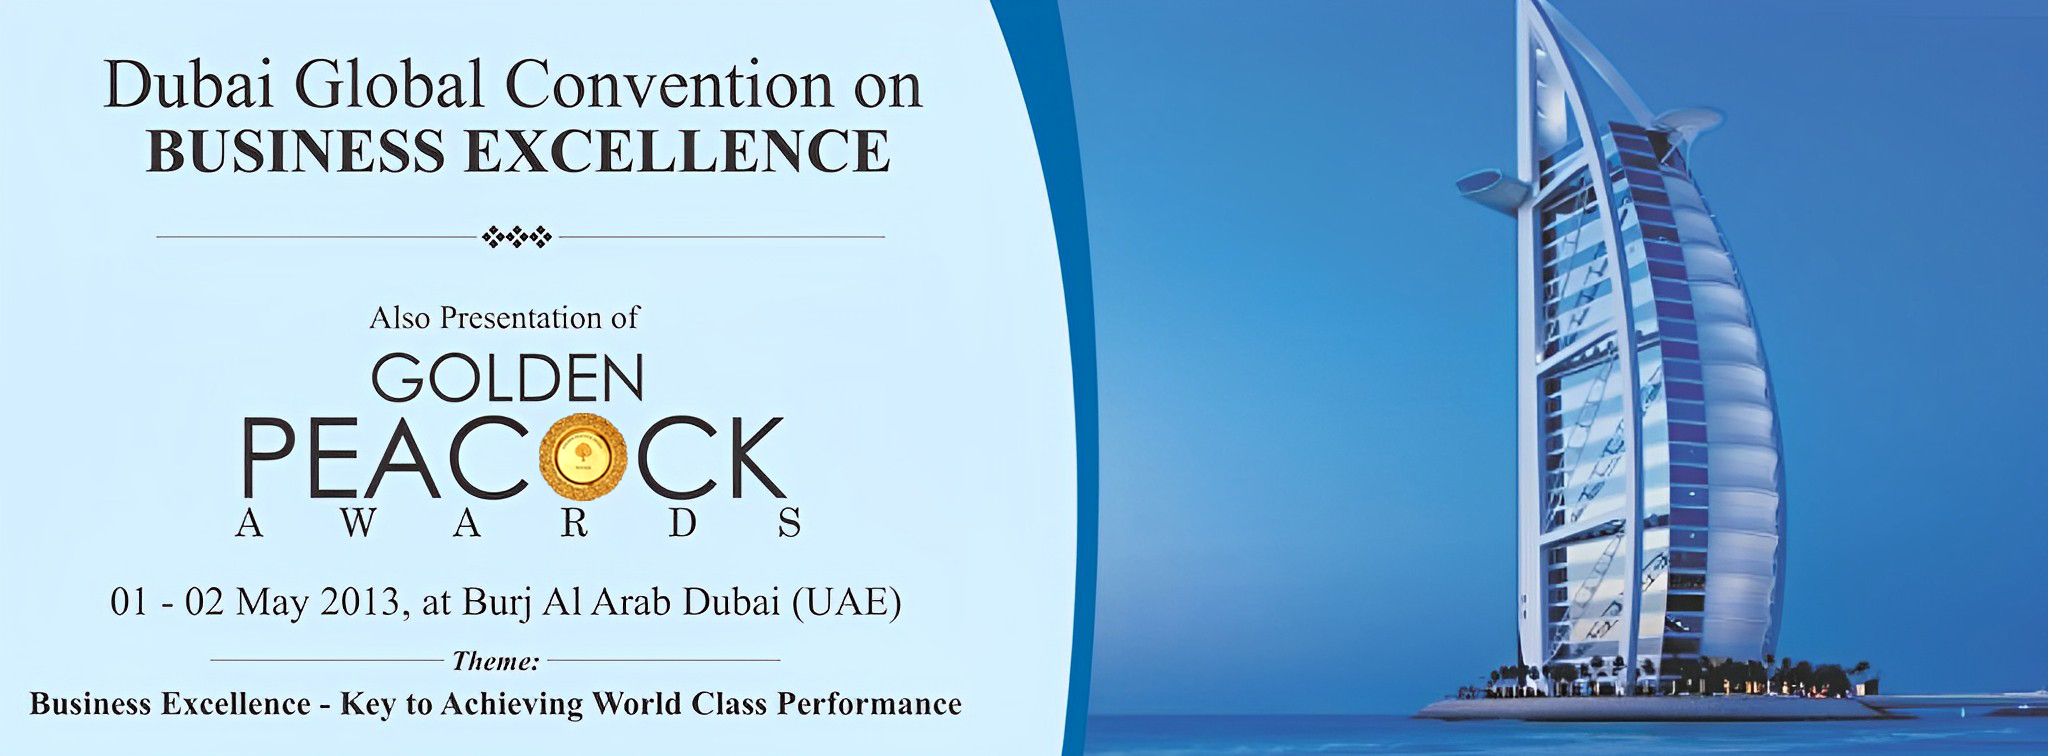 Dubai Global Convention on Business Excellence 2013